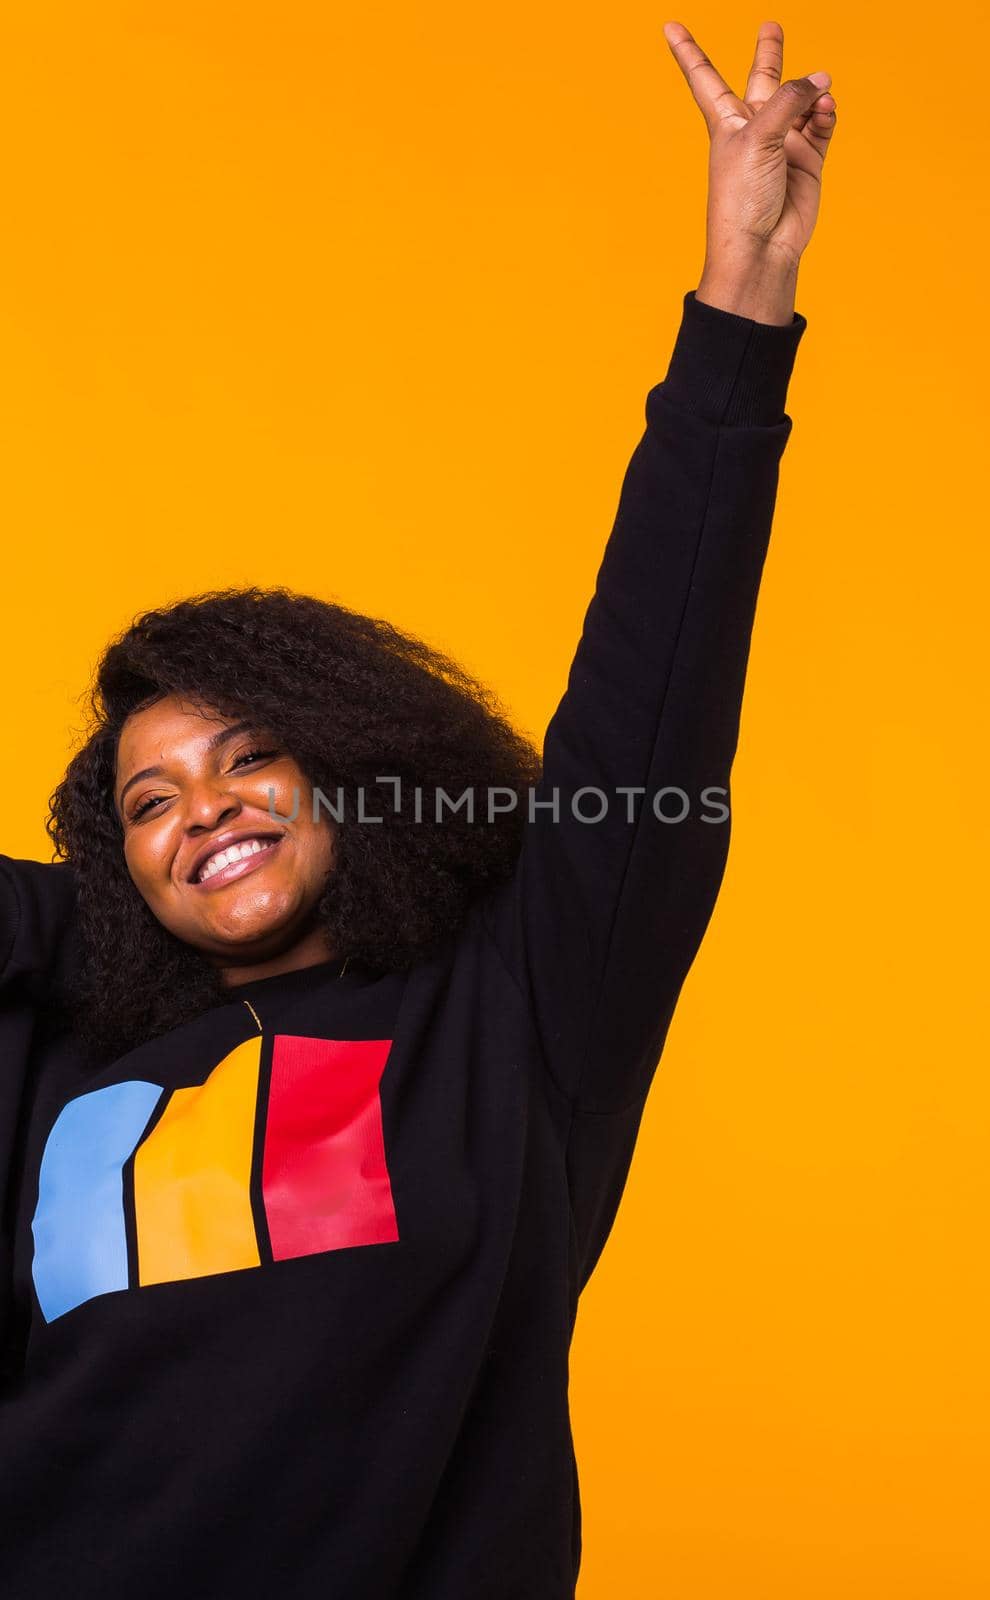 Young beautiful african american girl with an afro hairstyle. Portrait on yellow background